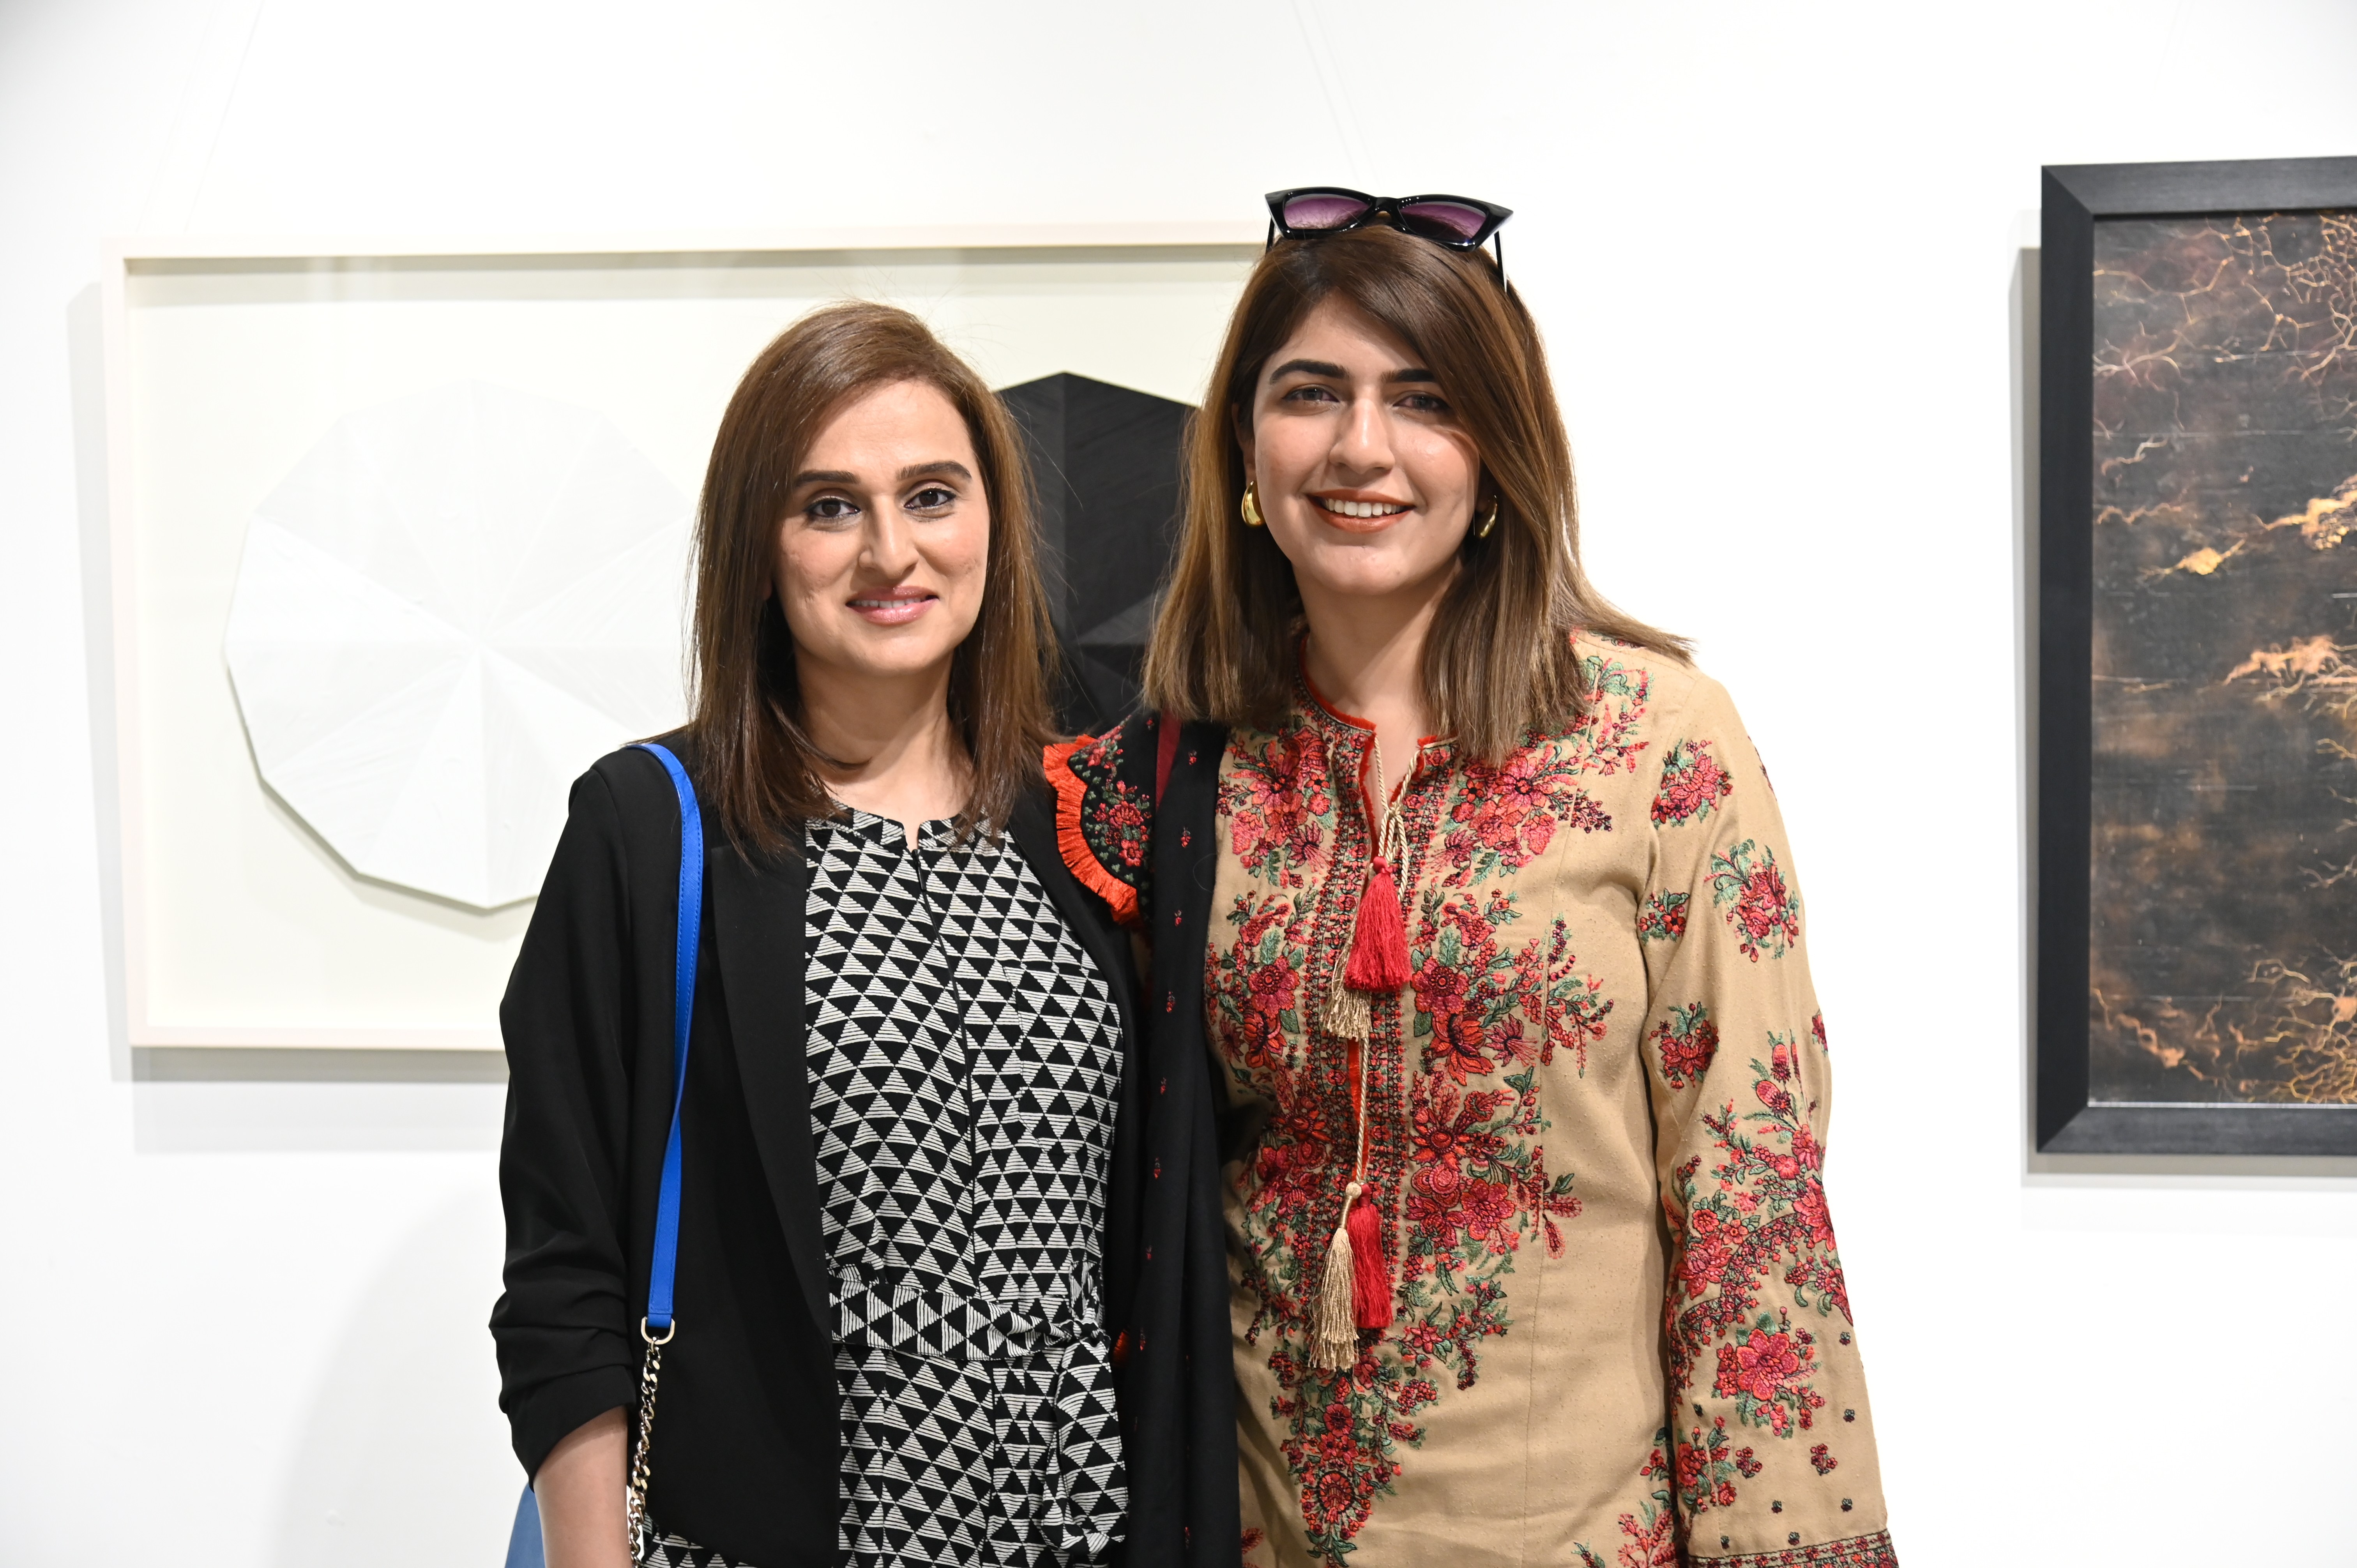 The visitors at the opening of Earth, Wind, Sky curated by Aasim Akhtar